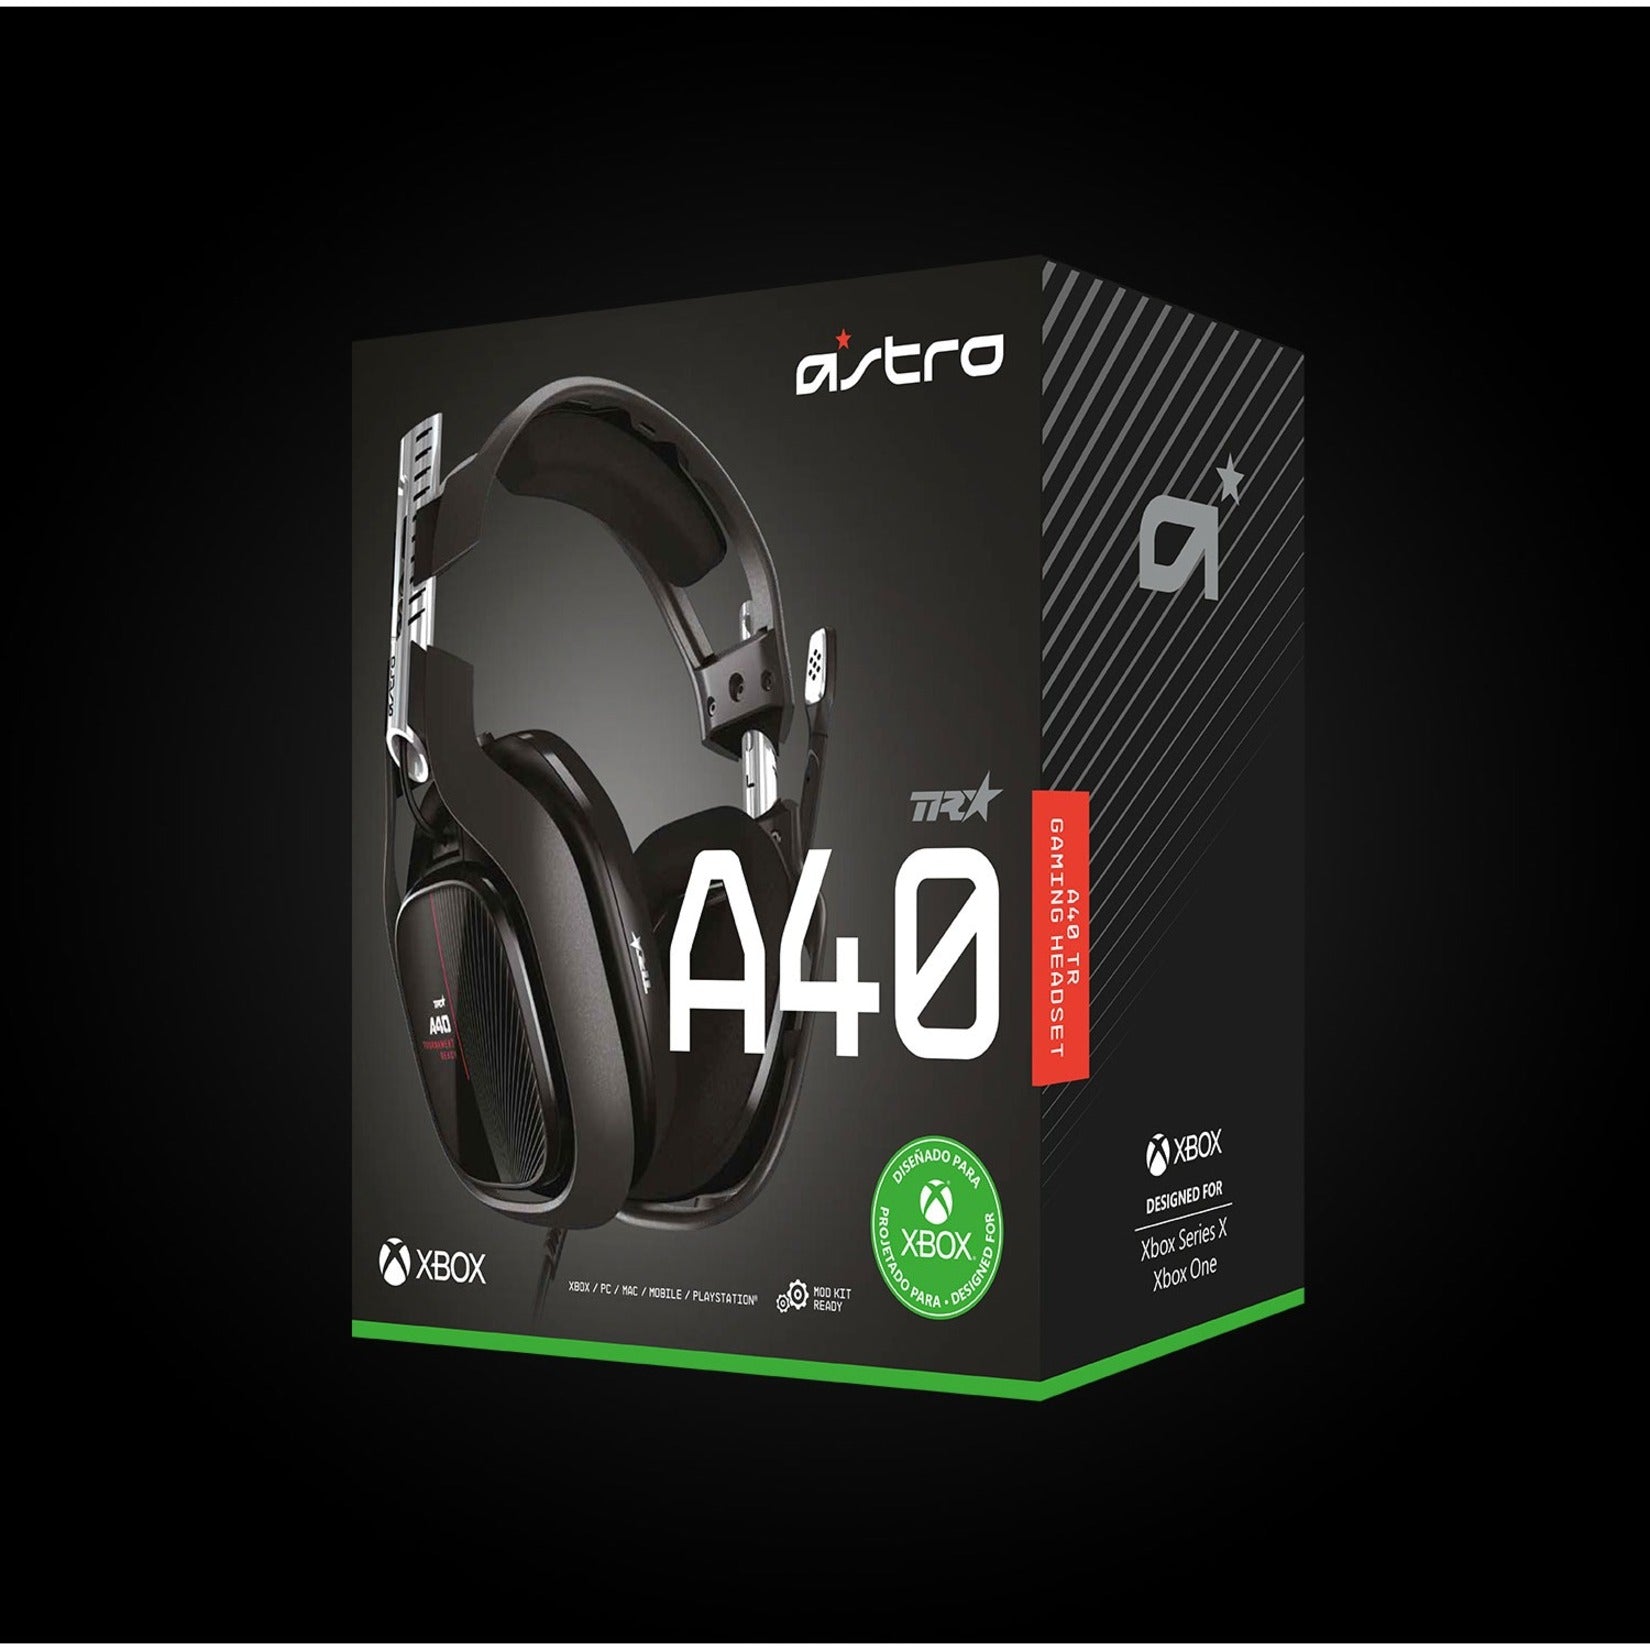 Astro 939-001828 A40 TR Headset, Comfortable, Noise Isolation, Lightweight